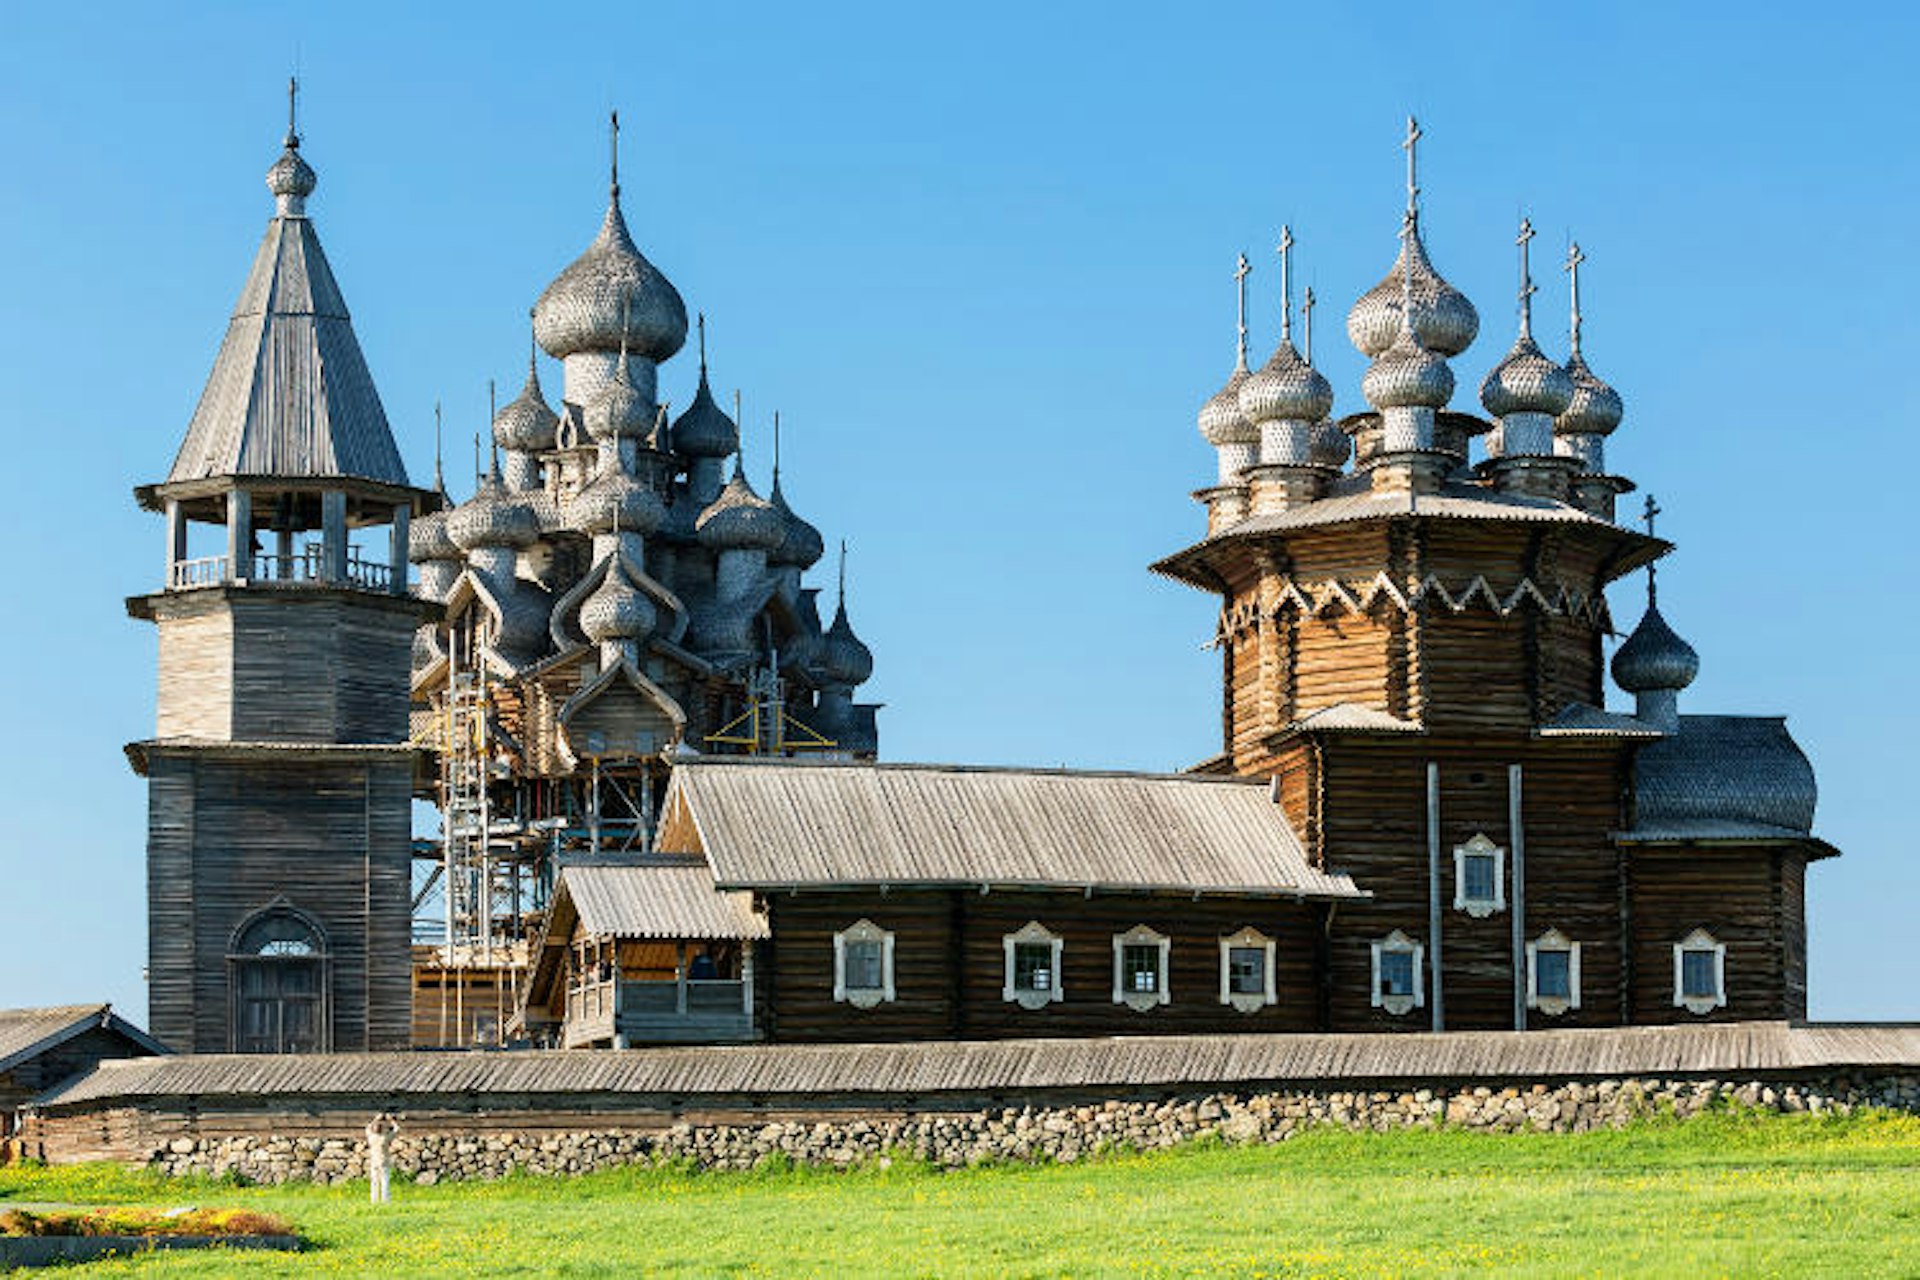 Unesco-listed Transfiguration Cathedral, Lake Onega, Kizhi island. Image by Sylvain Sonnet / Getty Images